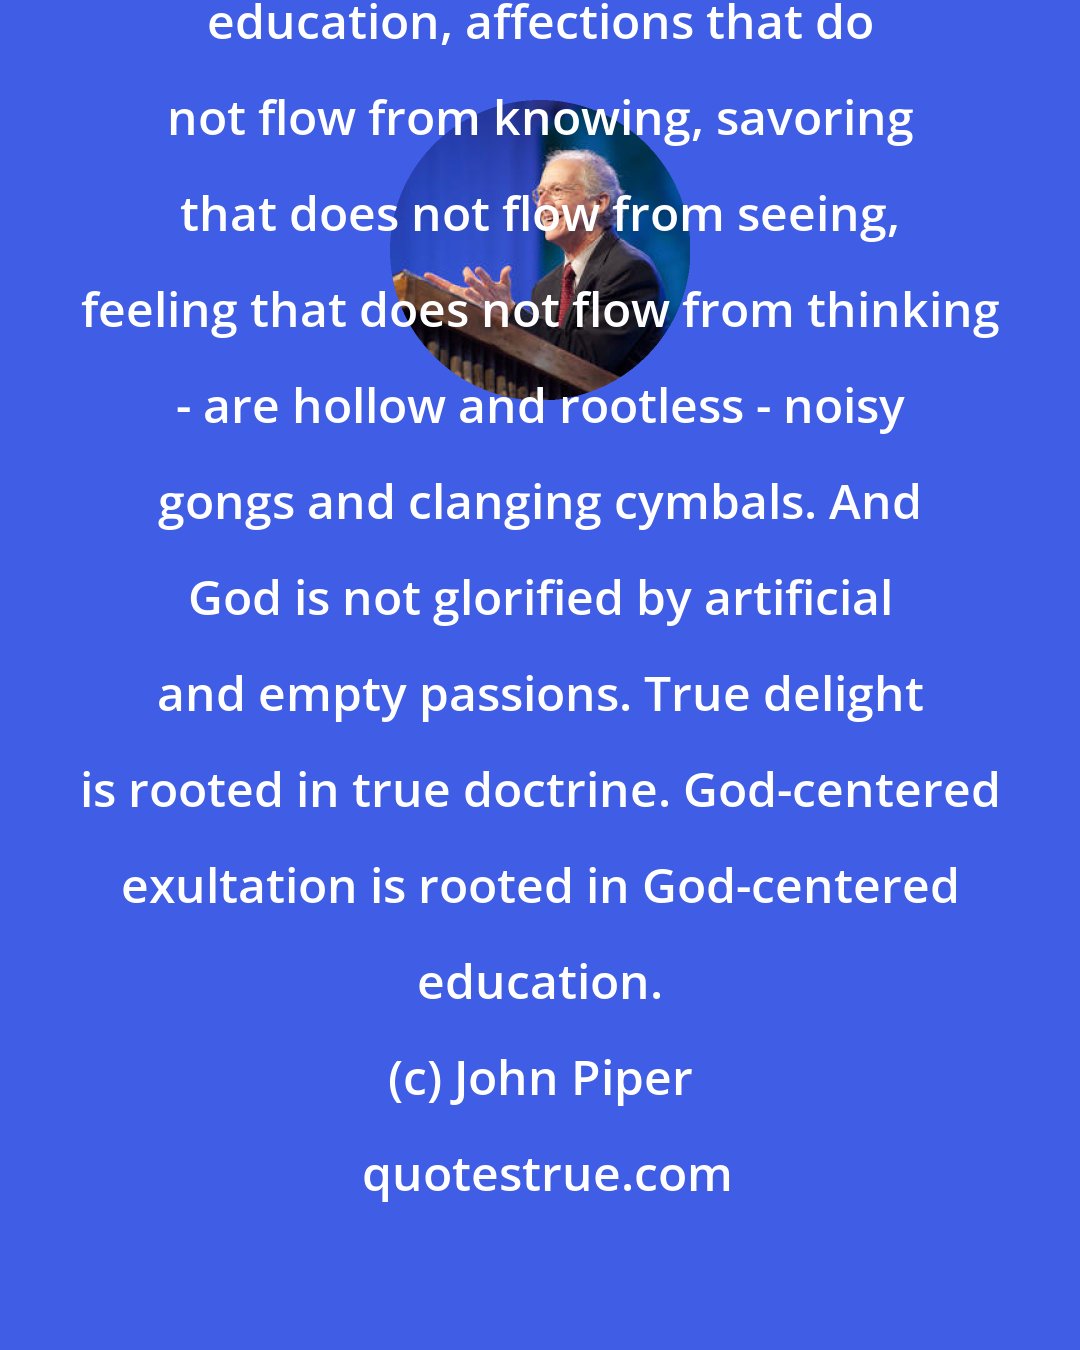 John Piper: Exultation that does not flow from education, affections that do not flow from knowing, savoring that does not flow from seeing, feeling that does not flow from thinking - are hollow and rootless - noisy gongs and clanging cymbals. And God is not glorified by artificial and empty passions. True delight is rooted in true doctrine. God-centered exultation is rooted in God-centered education.